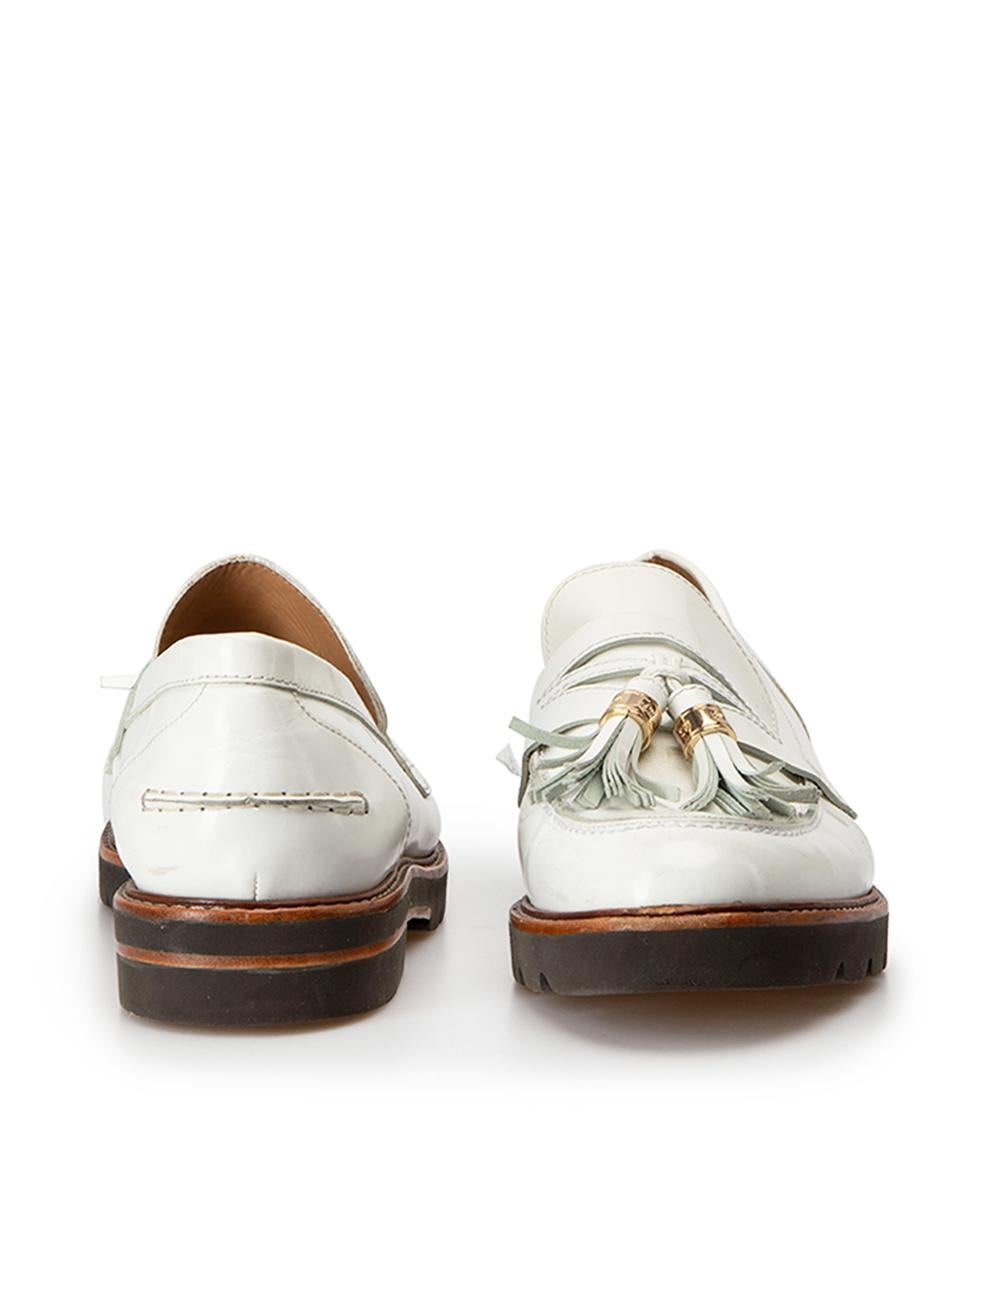 Stuart Weitzman Women's White Tassel Detail Loafers In Good Condition For Sale In London, GB